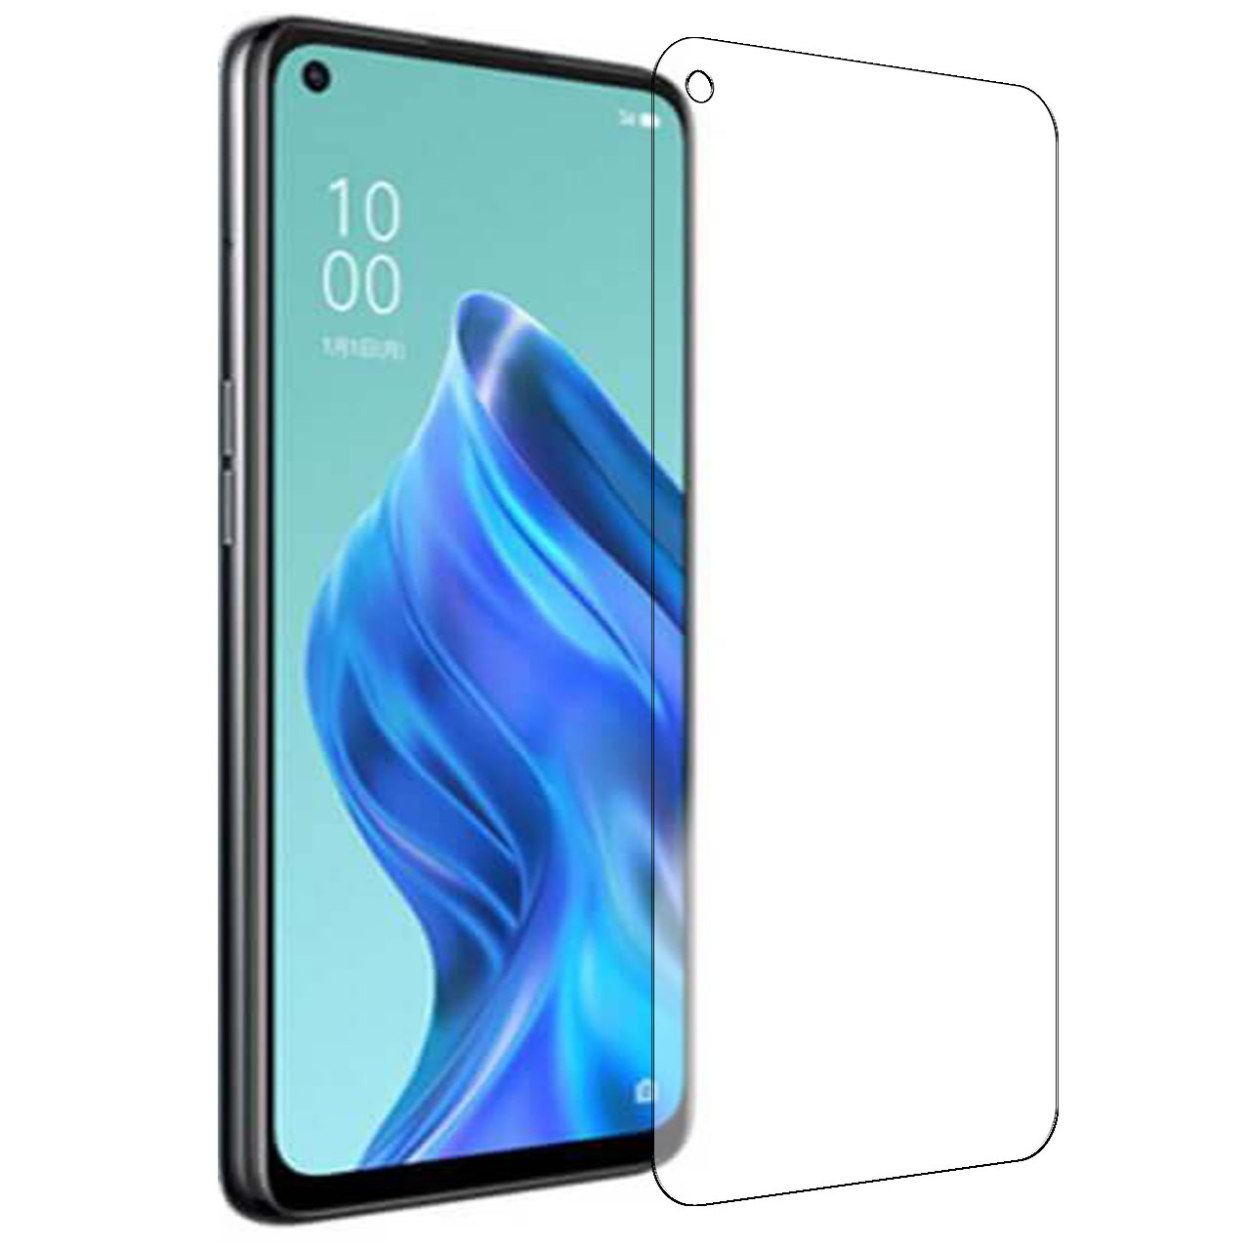 OPPO Reno5 A フィルム opporeno5a 保護フィルム リノ5a PET 保護フィル...